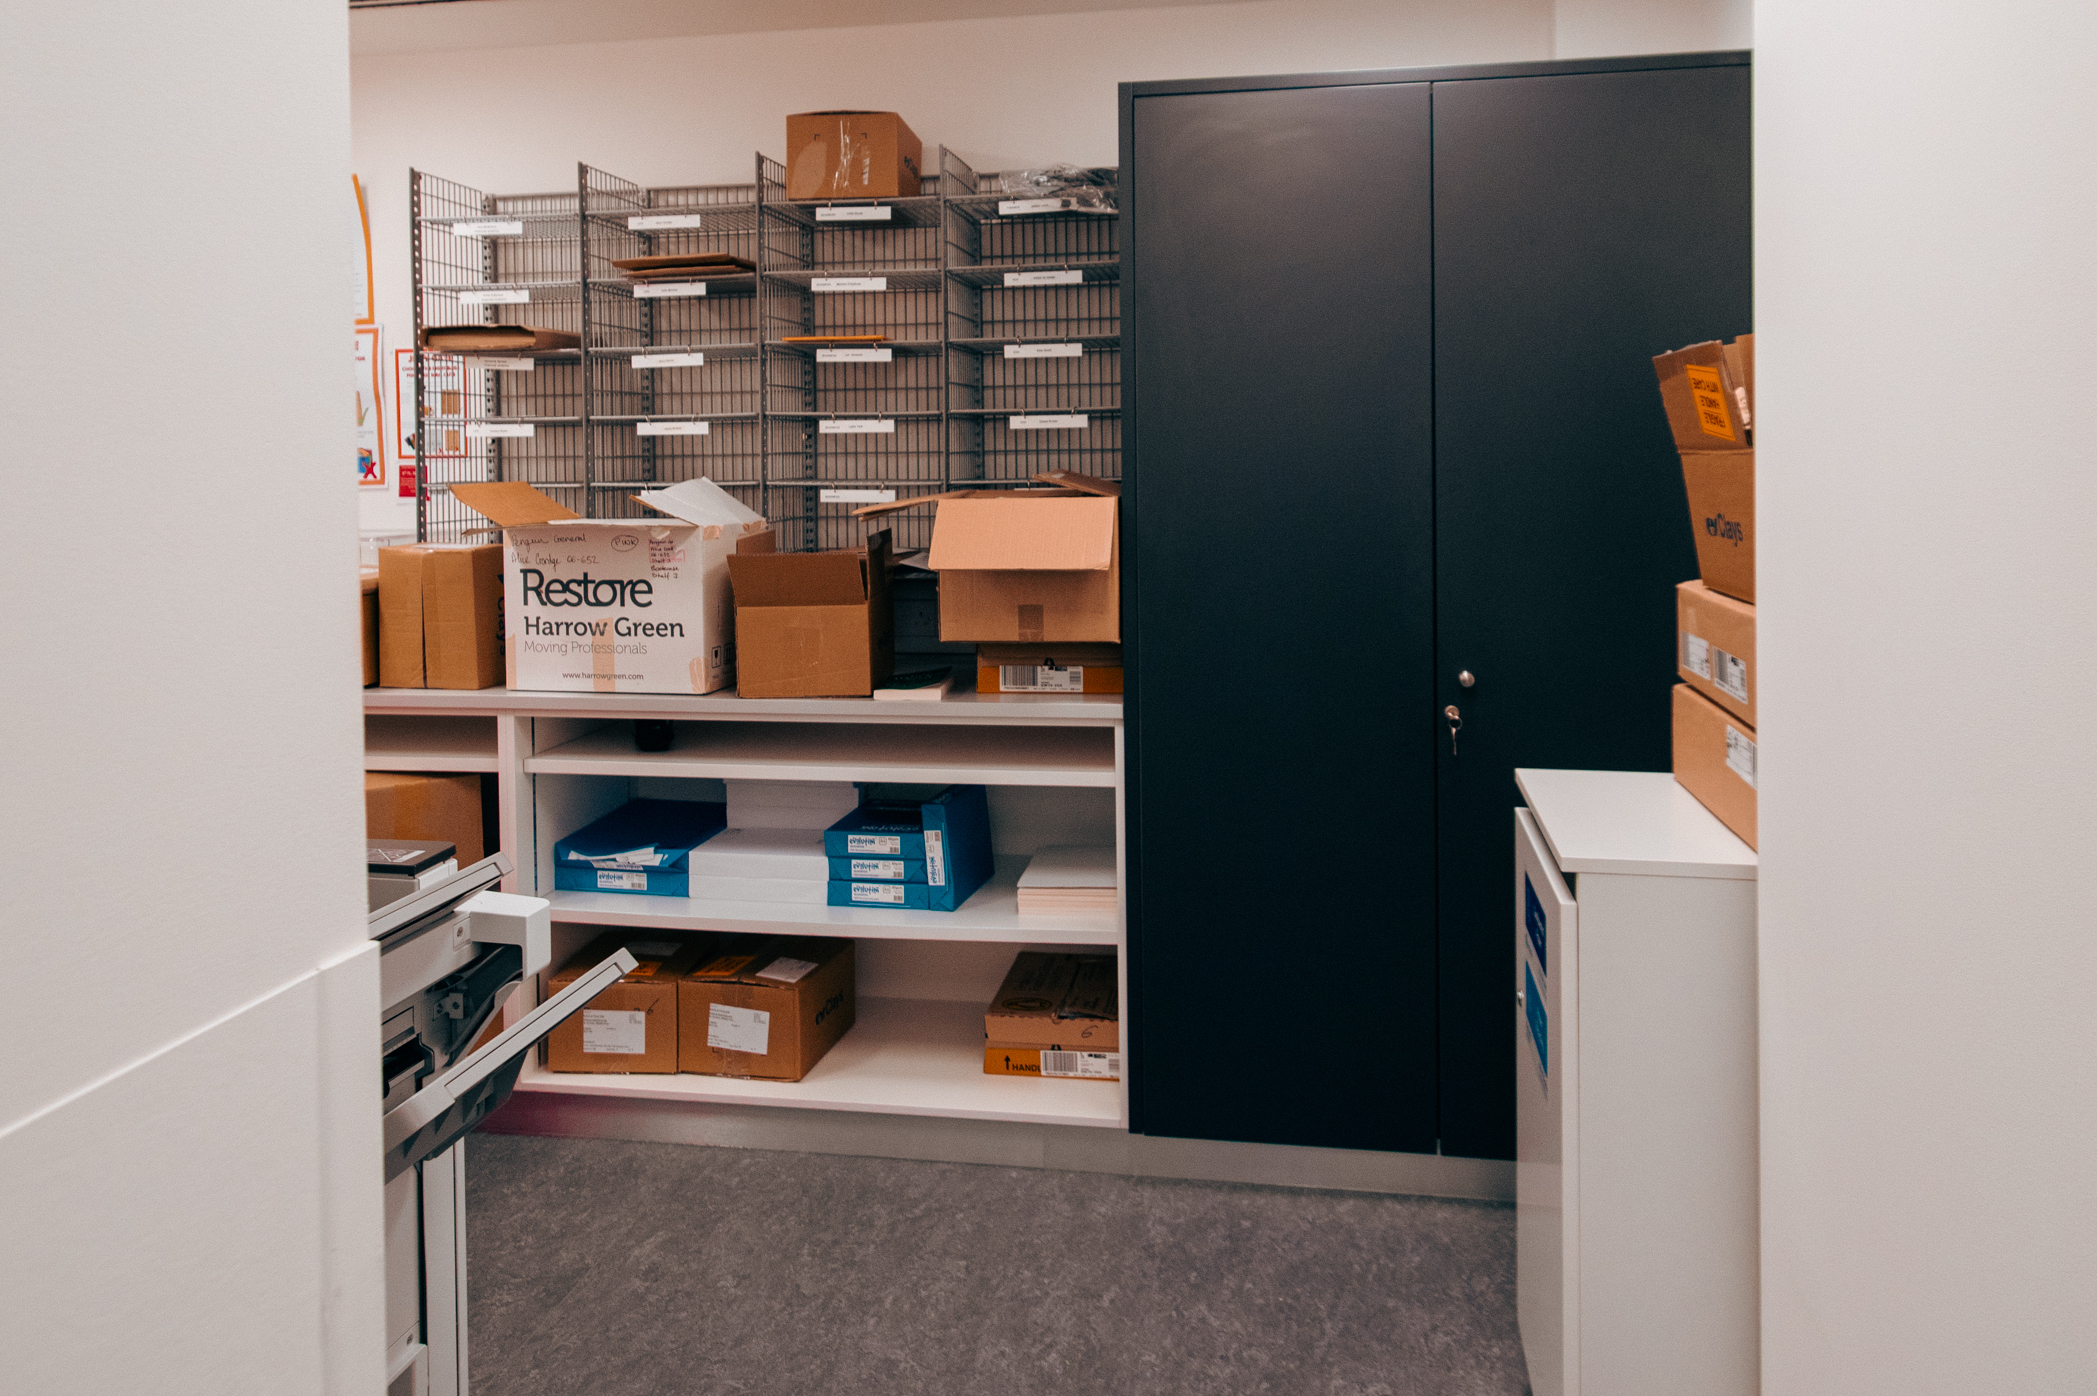 Printer room contains cubby holes for each team's post, cardboard boxes with stationery supplies, and large black storage cabinet.